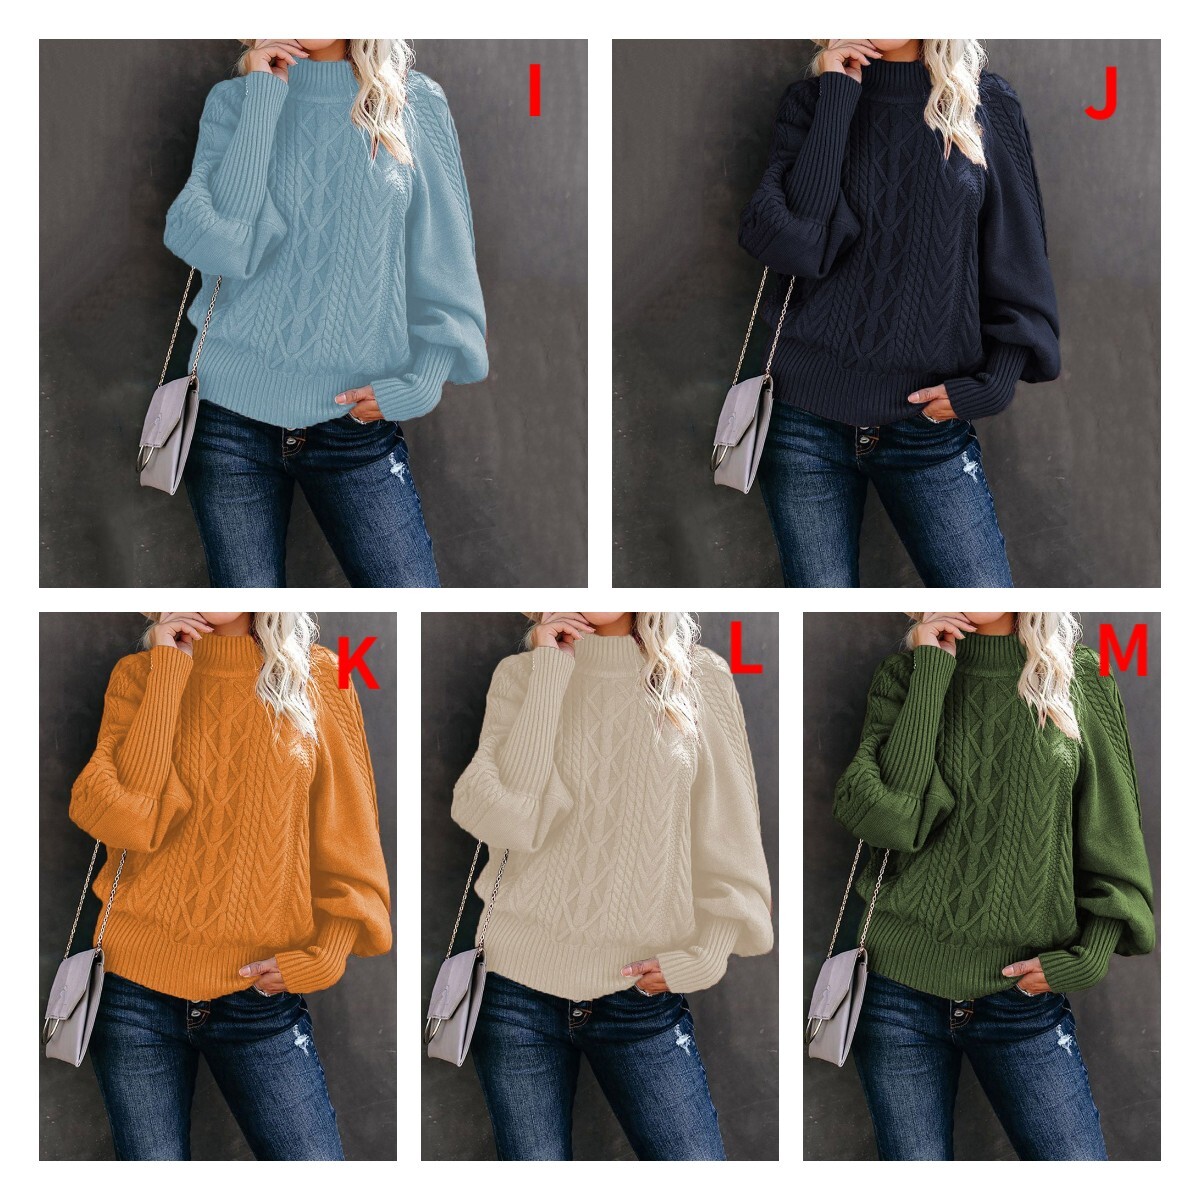 2021 Winter New Middle Neck Sweater Women's Loose Long Sleeve Knitted Solid Sweater C03647